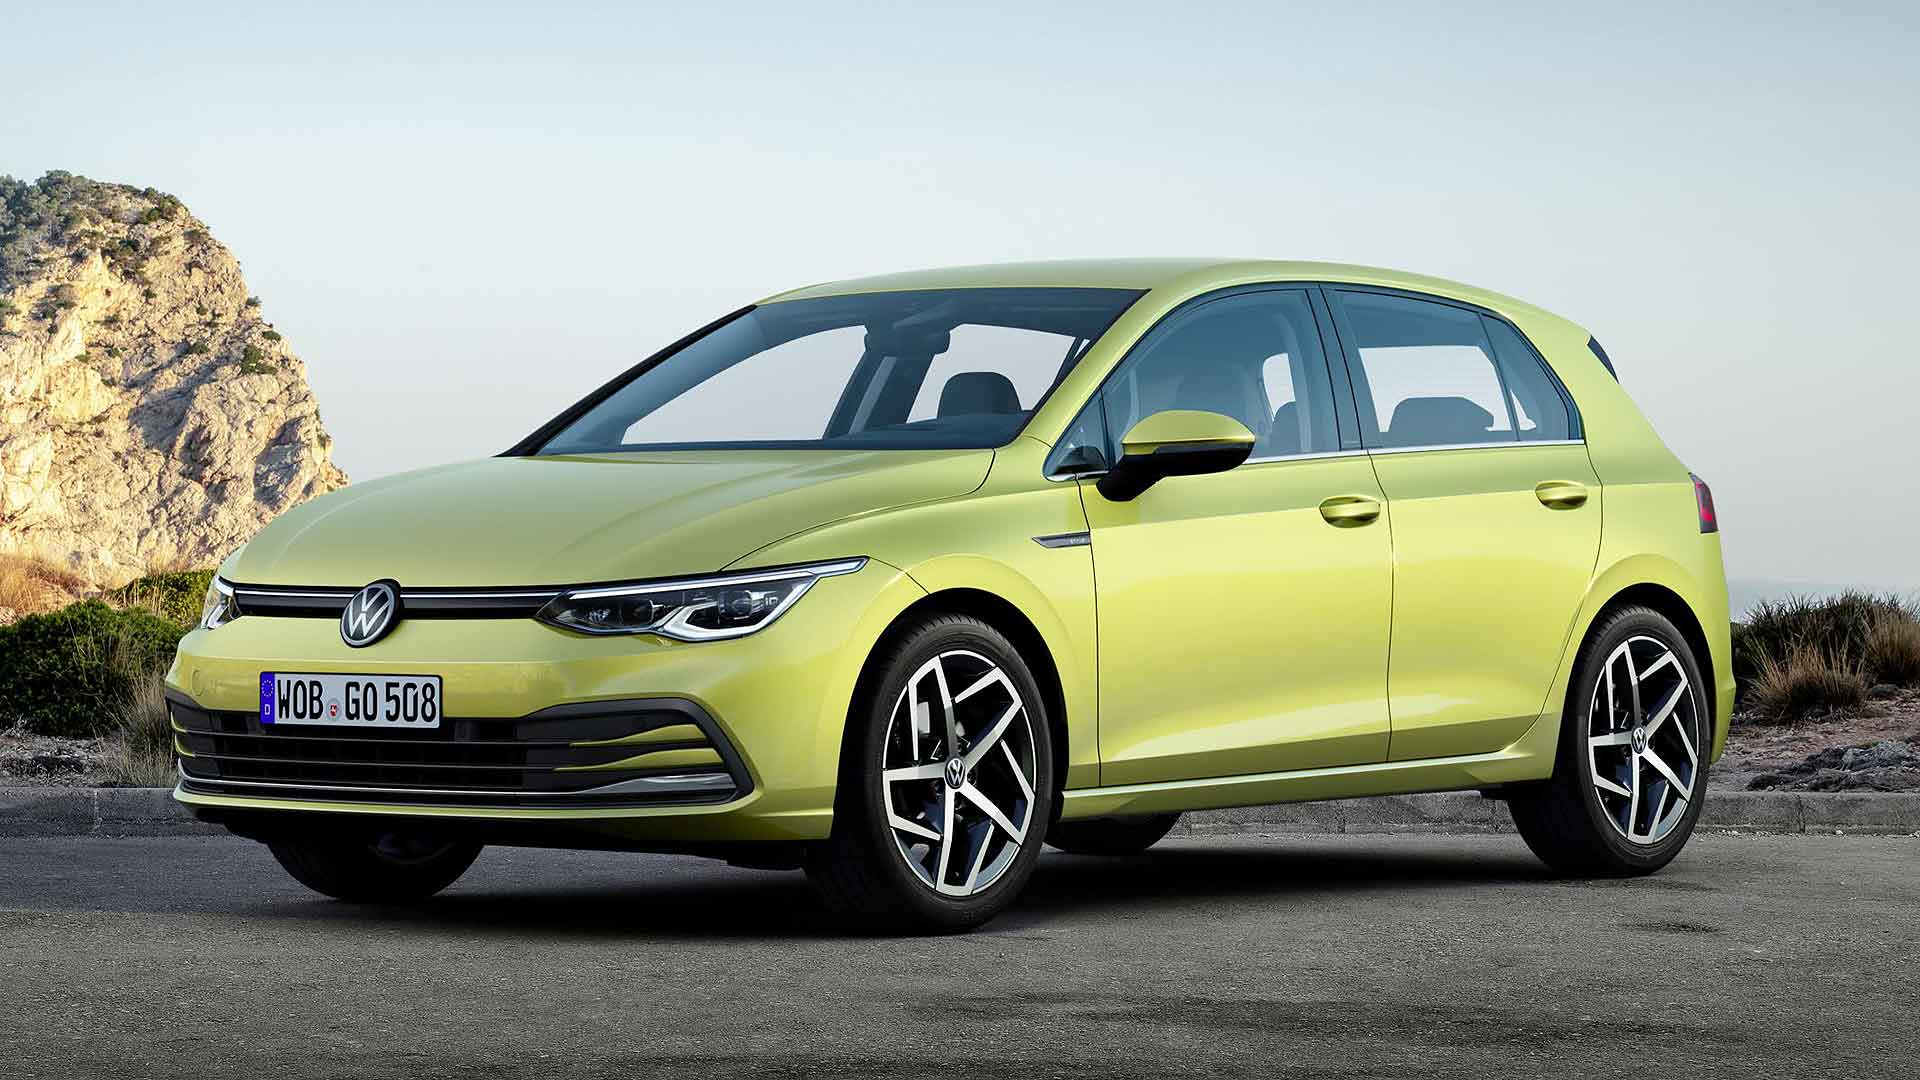 New Volkswagen Golf 8 prices start from £23,875 - Motoring Research